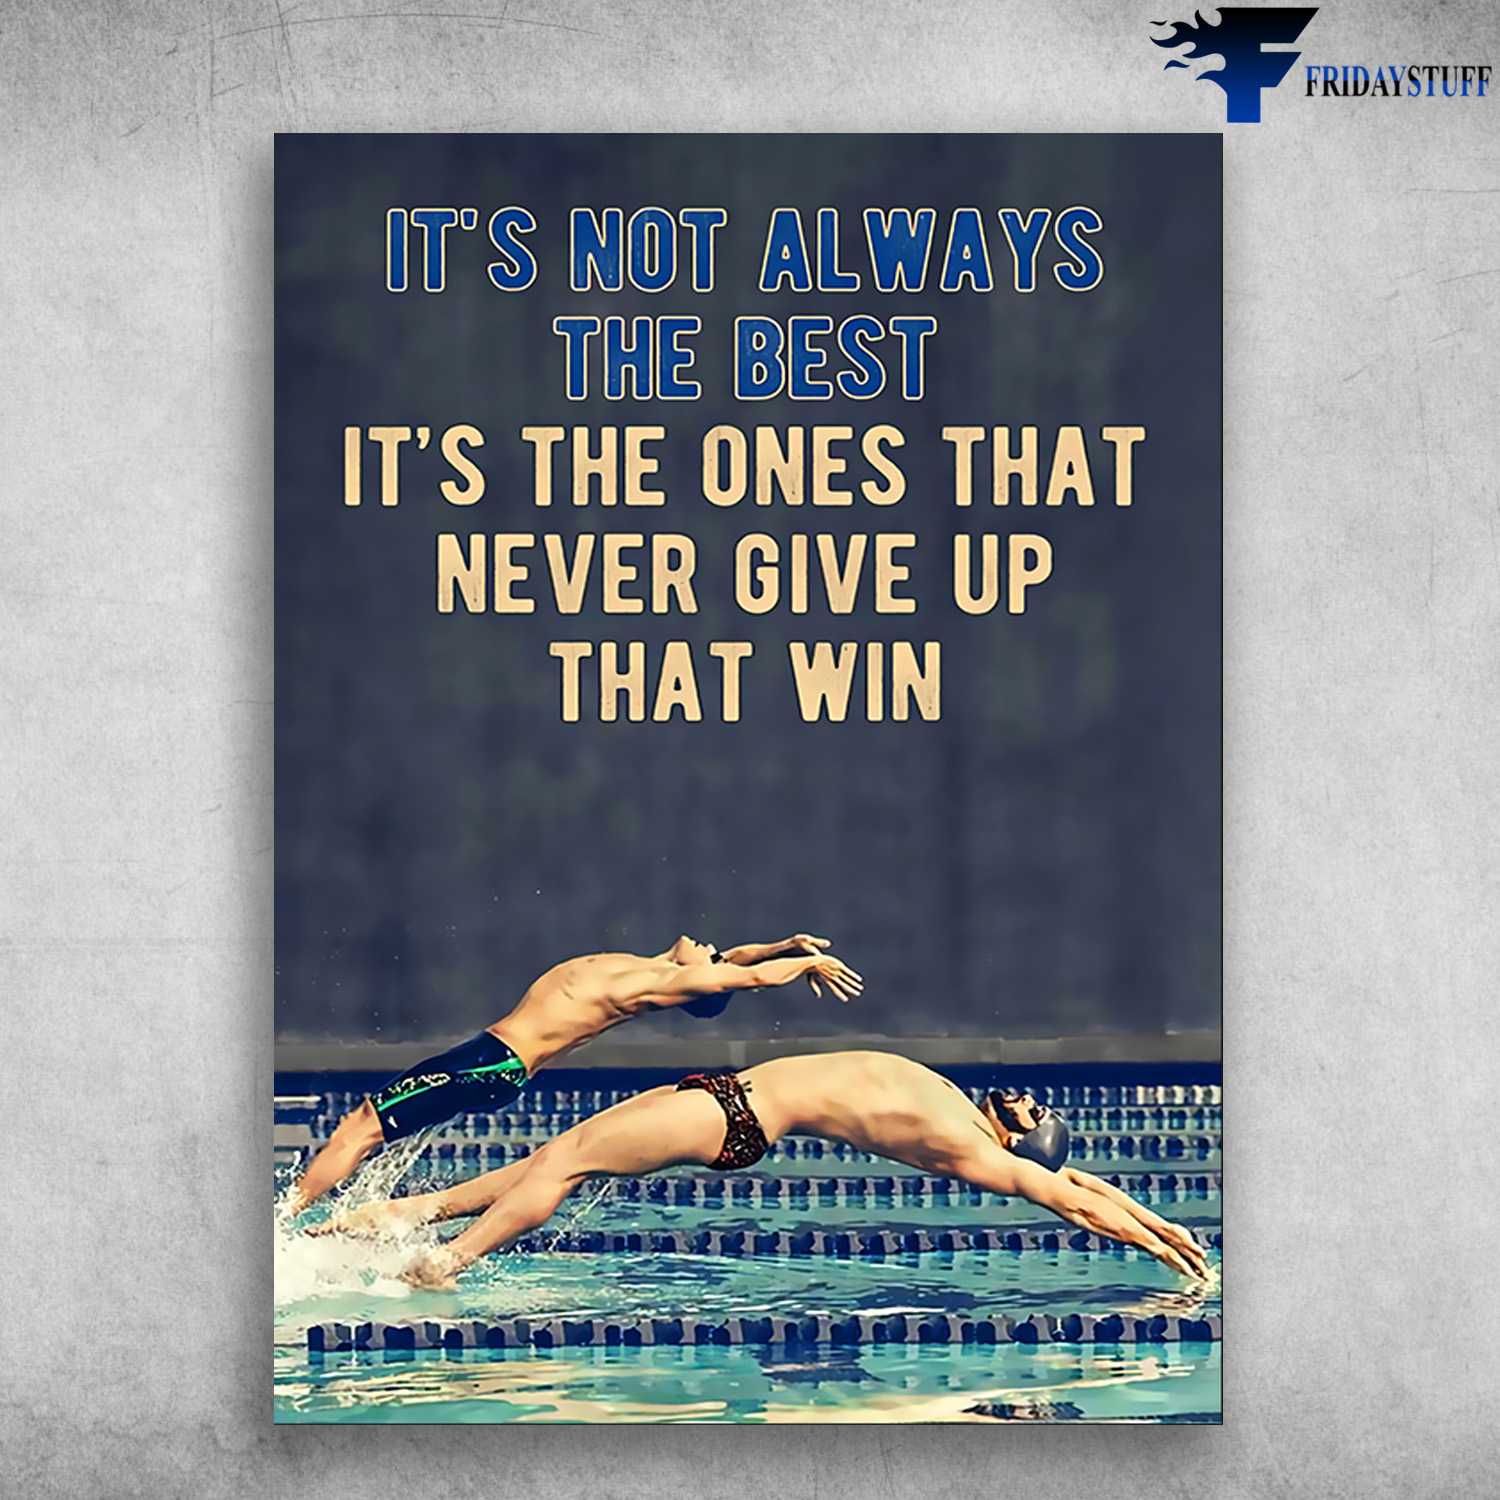 Swimming Athlete, Swimming Poster, It's Not Always The Best, It's The Ones That, Never Give Up That Win